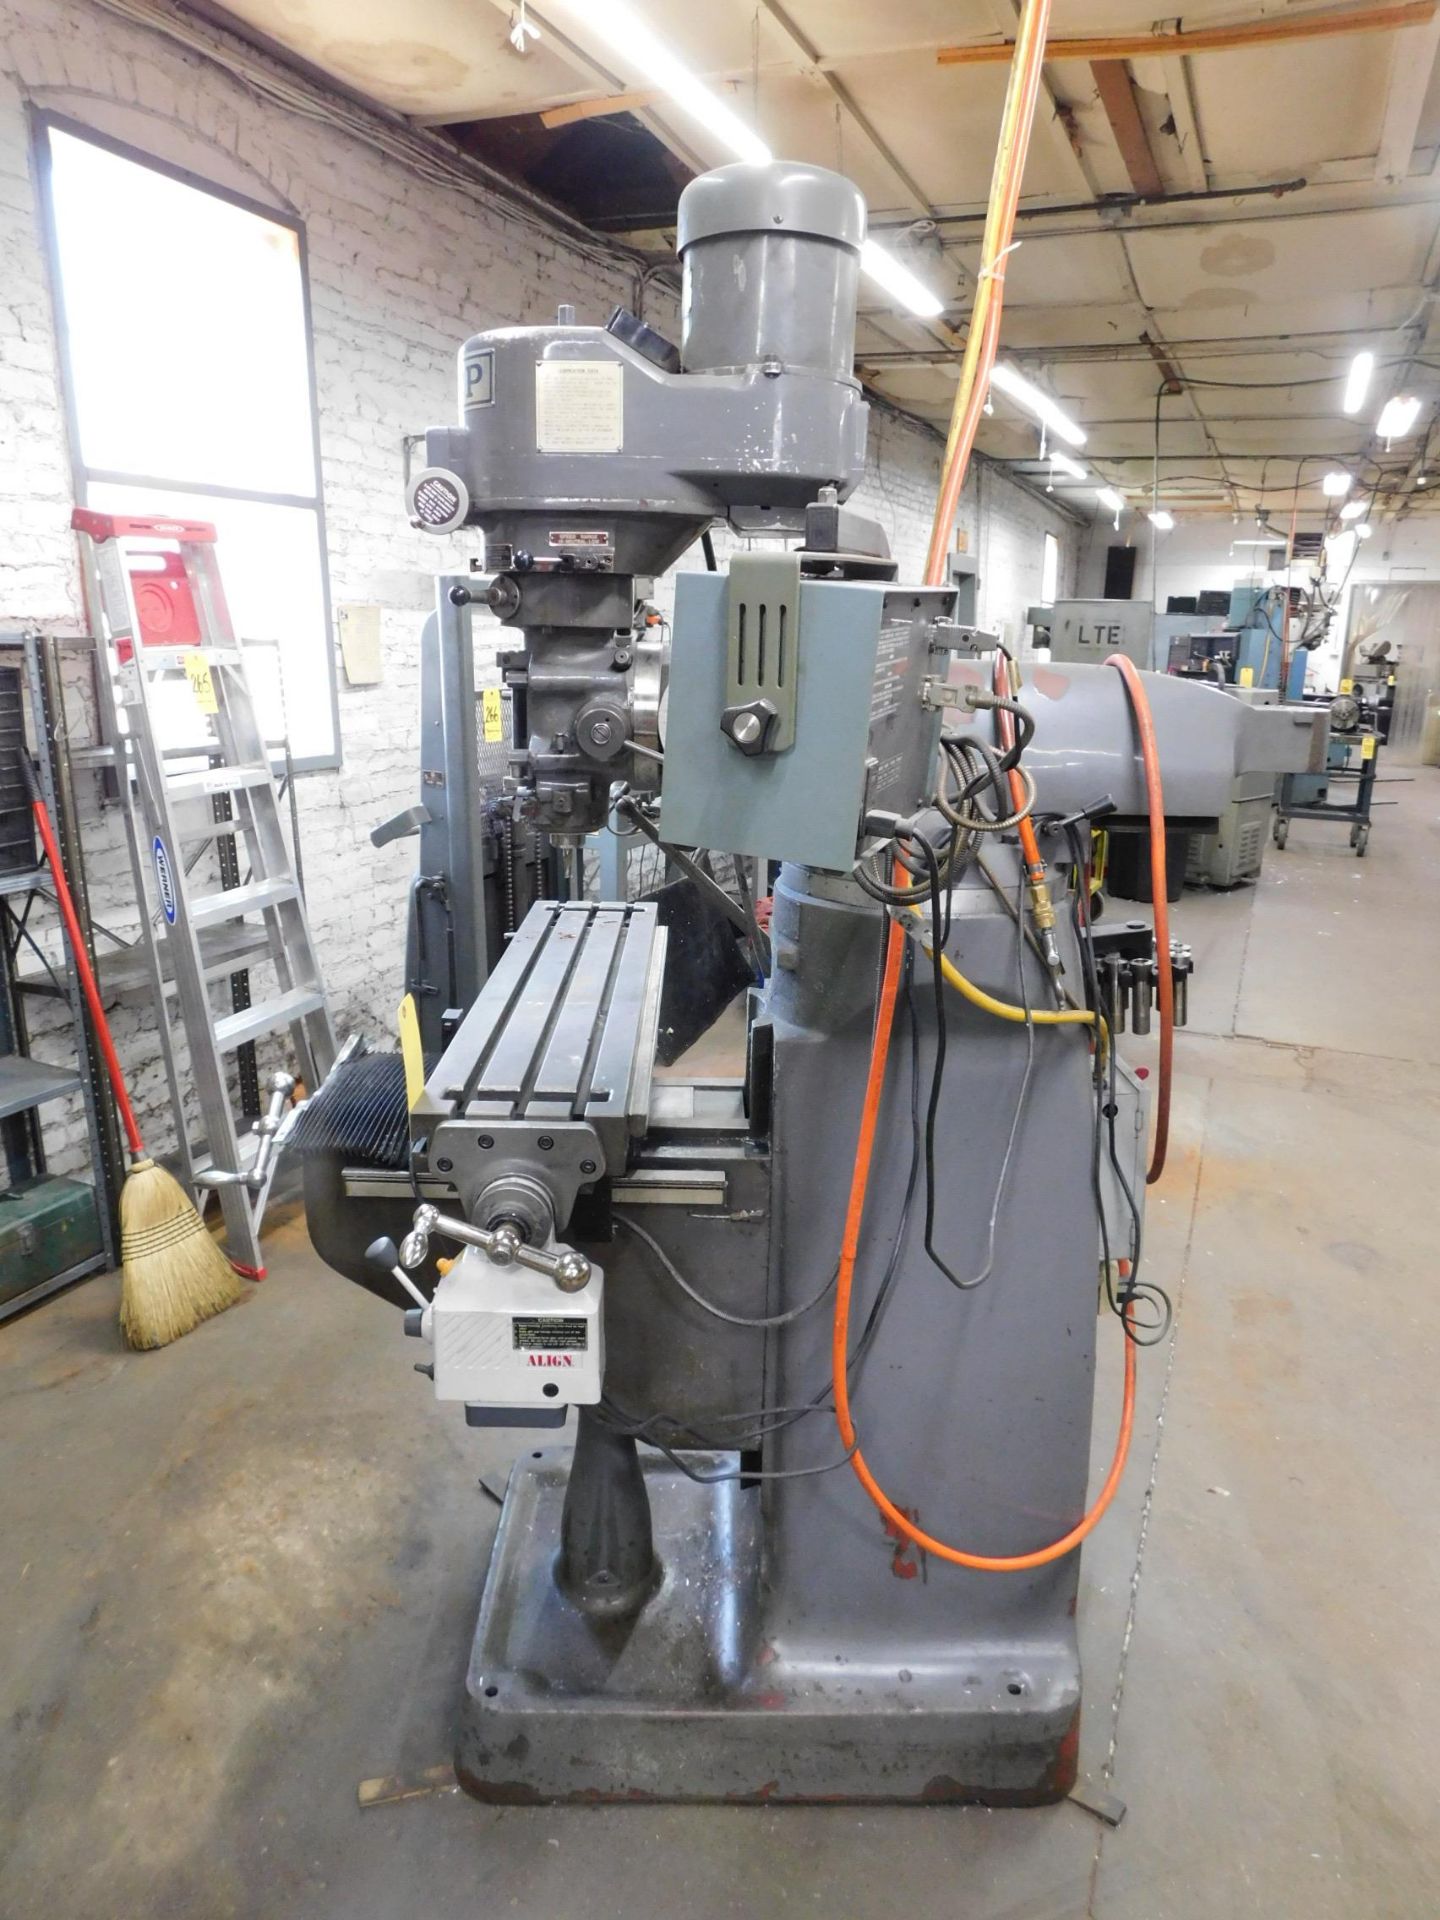 Sharpe Variable Speed Vertical Mill, 9X42" Table, Power feed Table, ACU-RITE Millrite DRO - Image 4 of 11